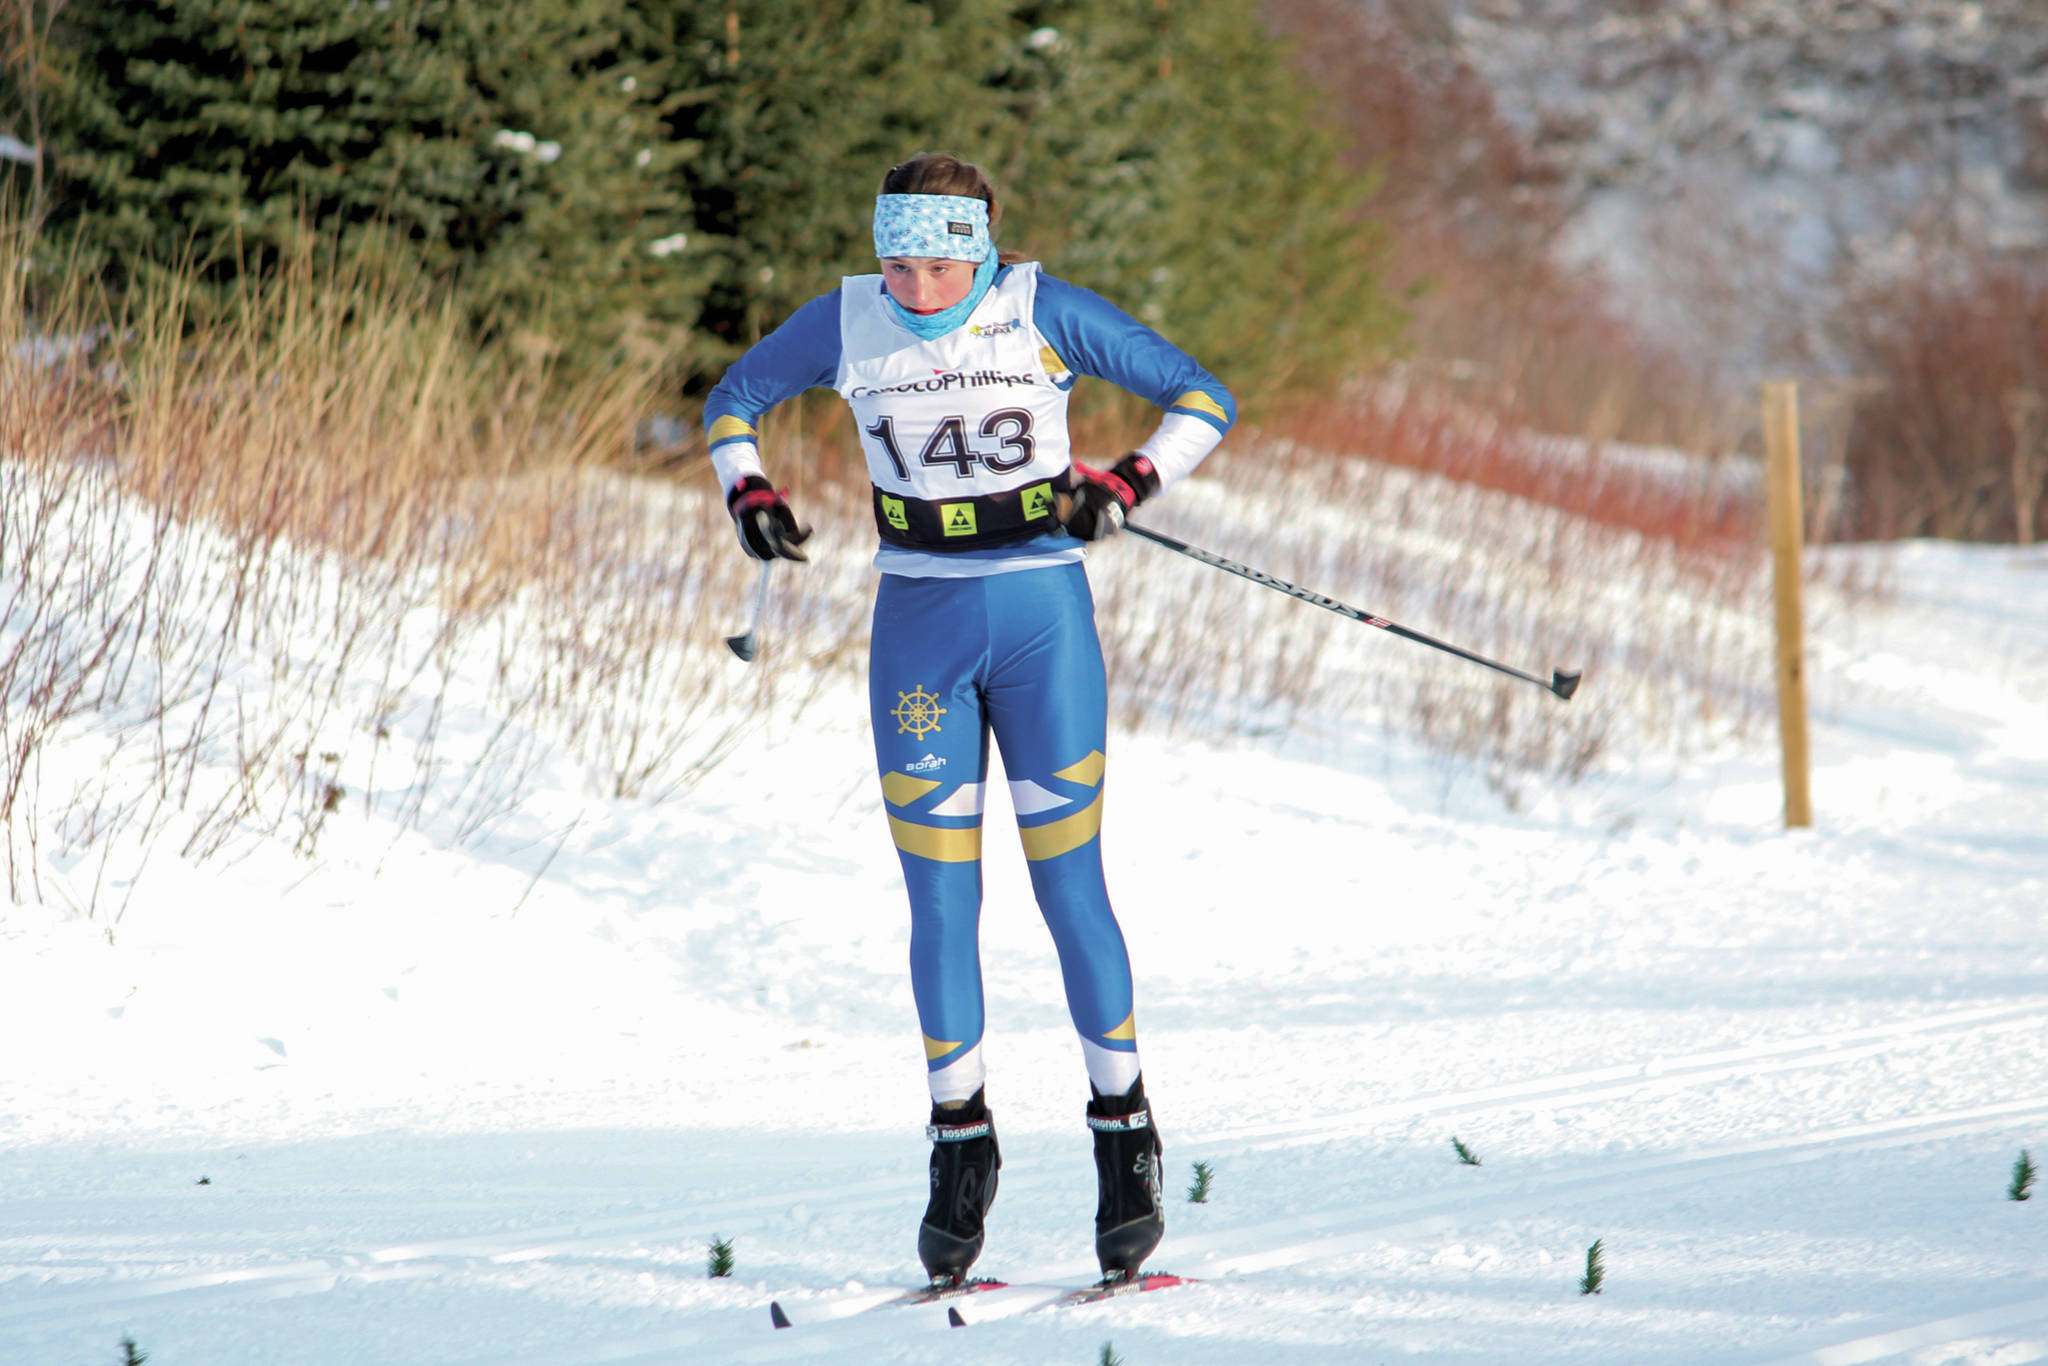 Homer’s Autumn Daigle skis to the finish of the Besh Cup 4 race, a 10-kilometer interval start classic race, on Sunday, Jan. 19, 2020 at the Lookout Mountain Trails on Ohlson Mountain Road outside Homer, Alaska. (Photo by Megan Pacer/Homer News)